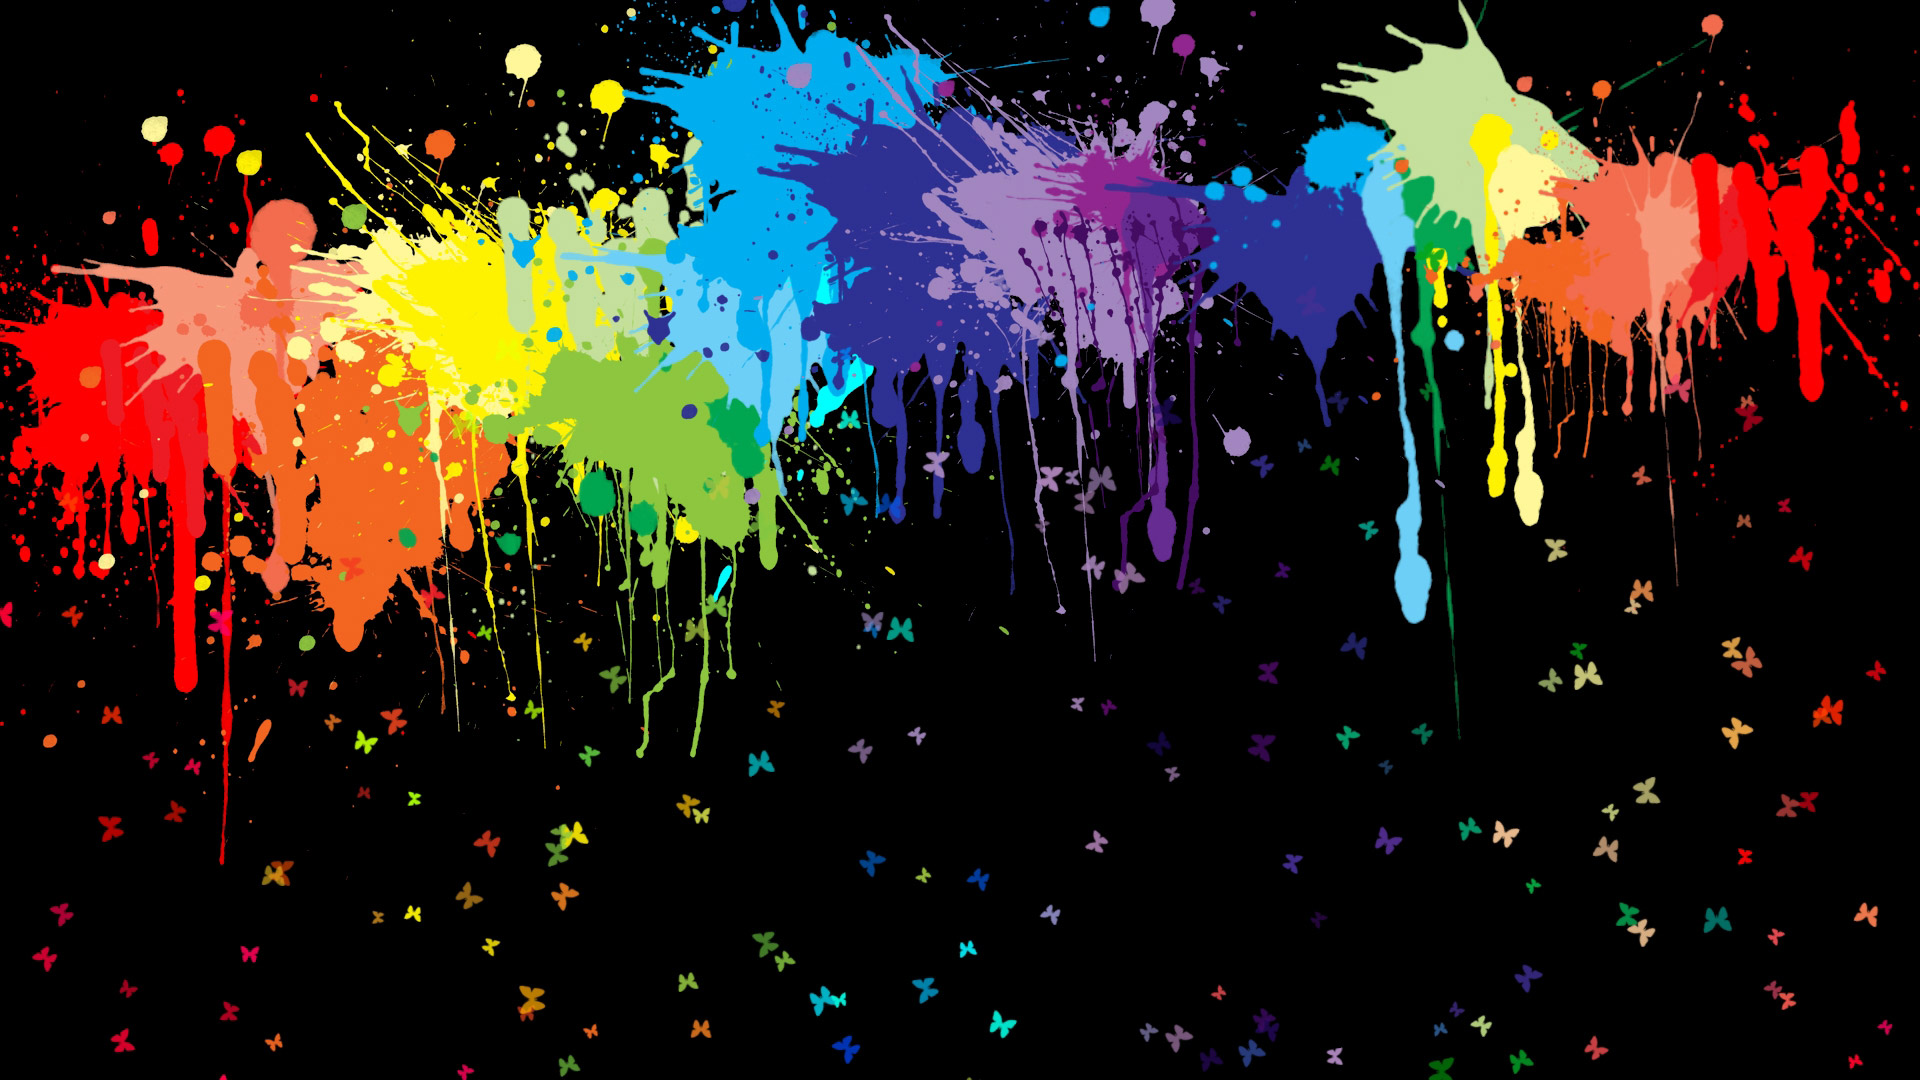 hd wallpaper colorful abstract wallpapers55com   Best Wallpapers